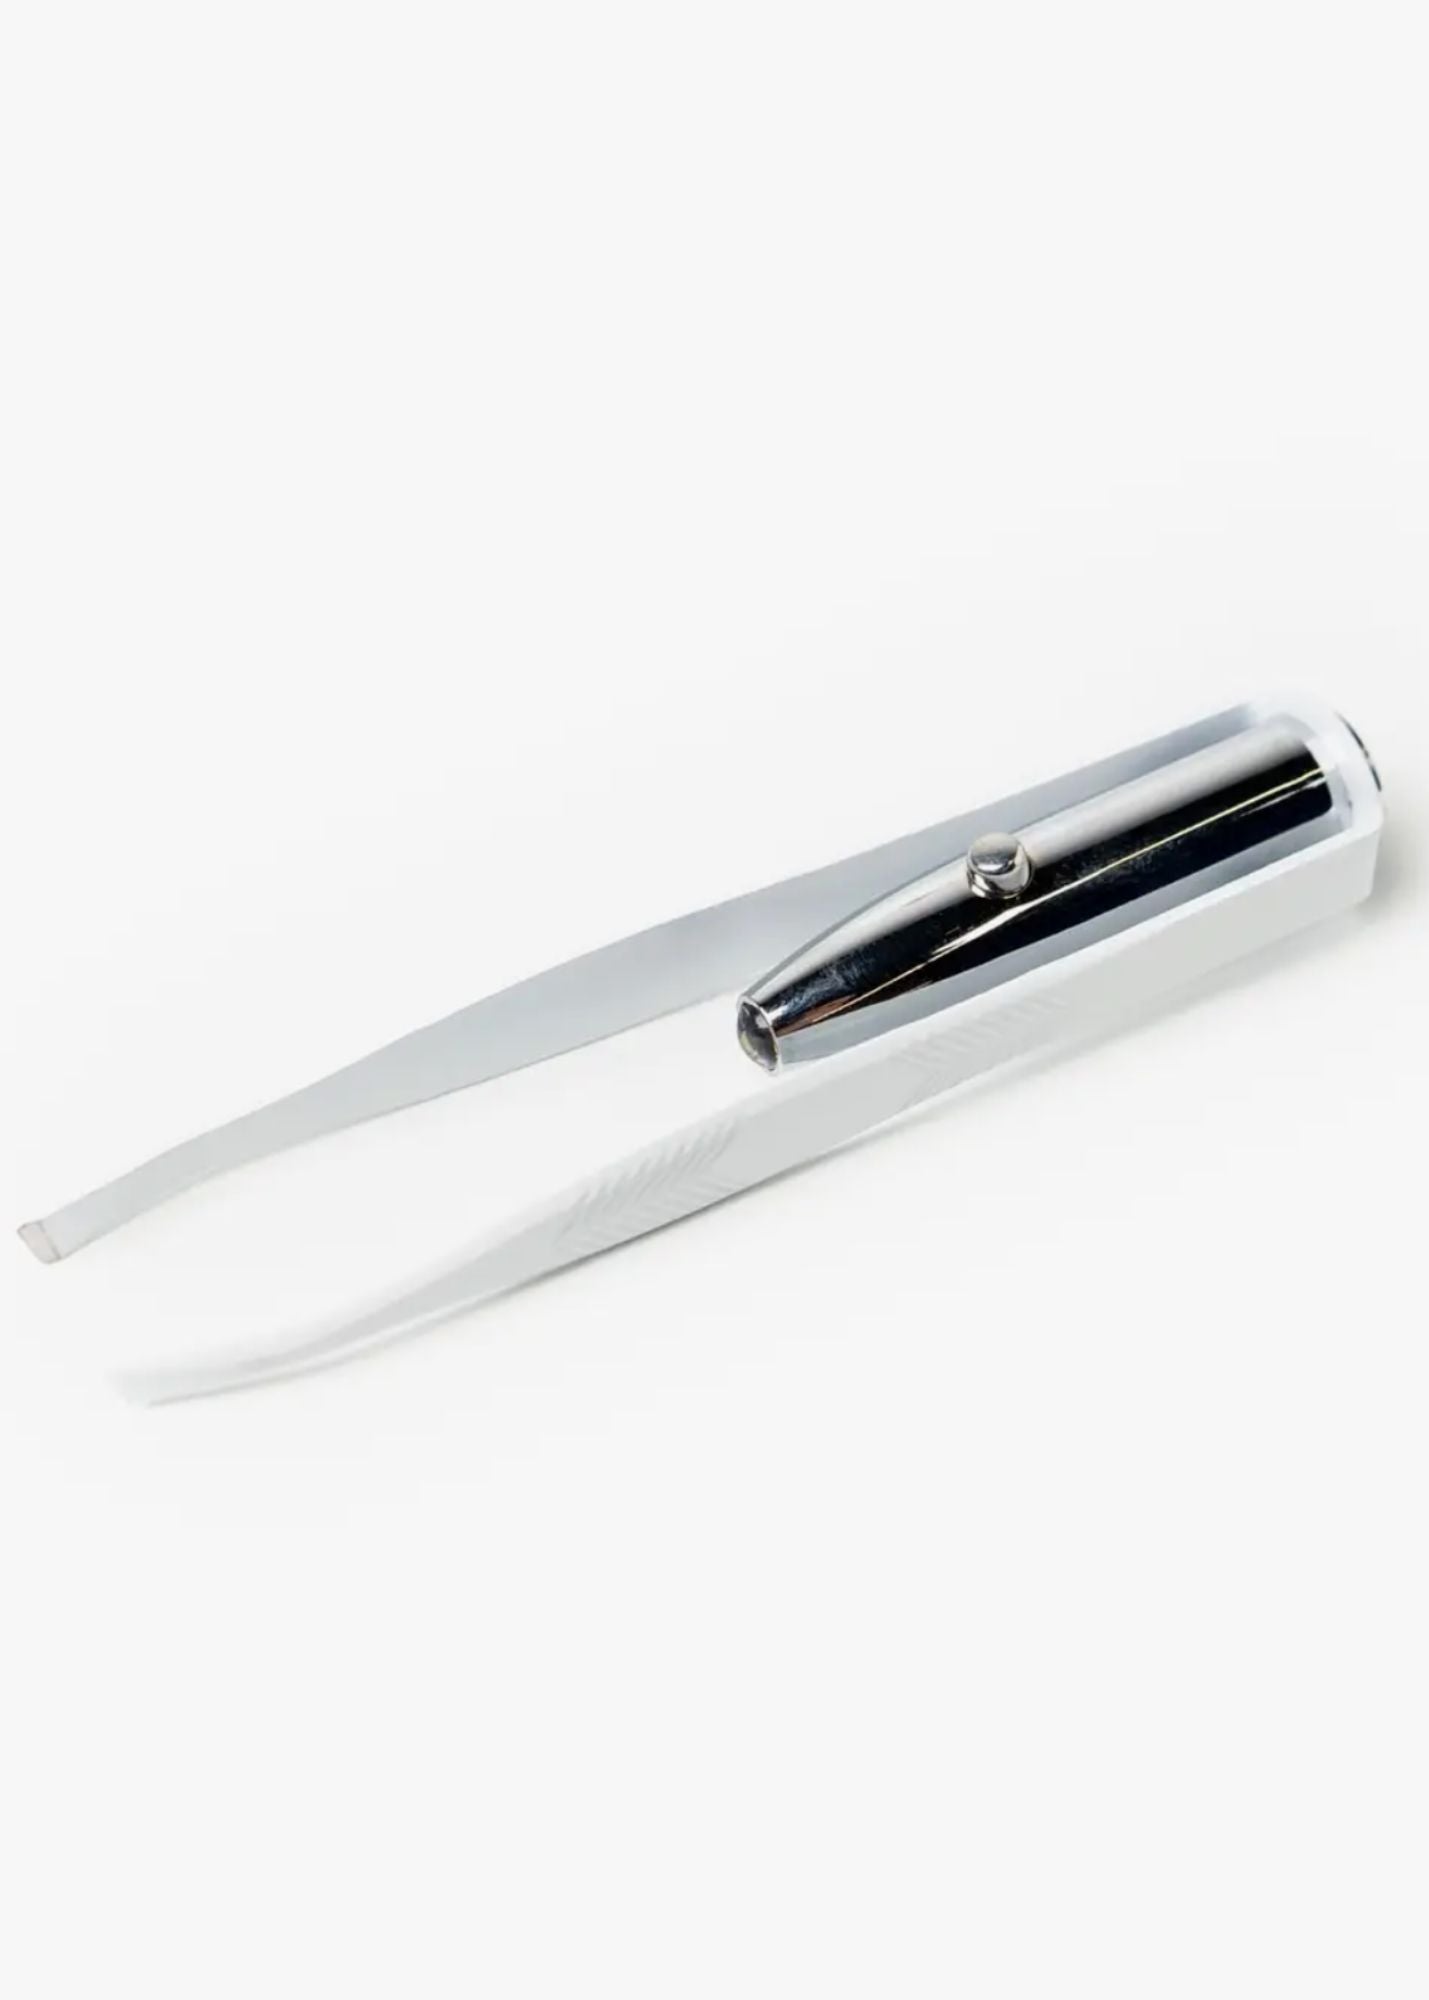 Light Up Stainless Steel Tweezers Gifts White